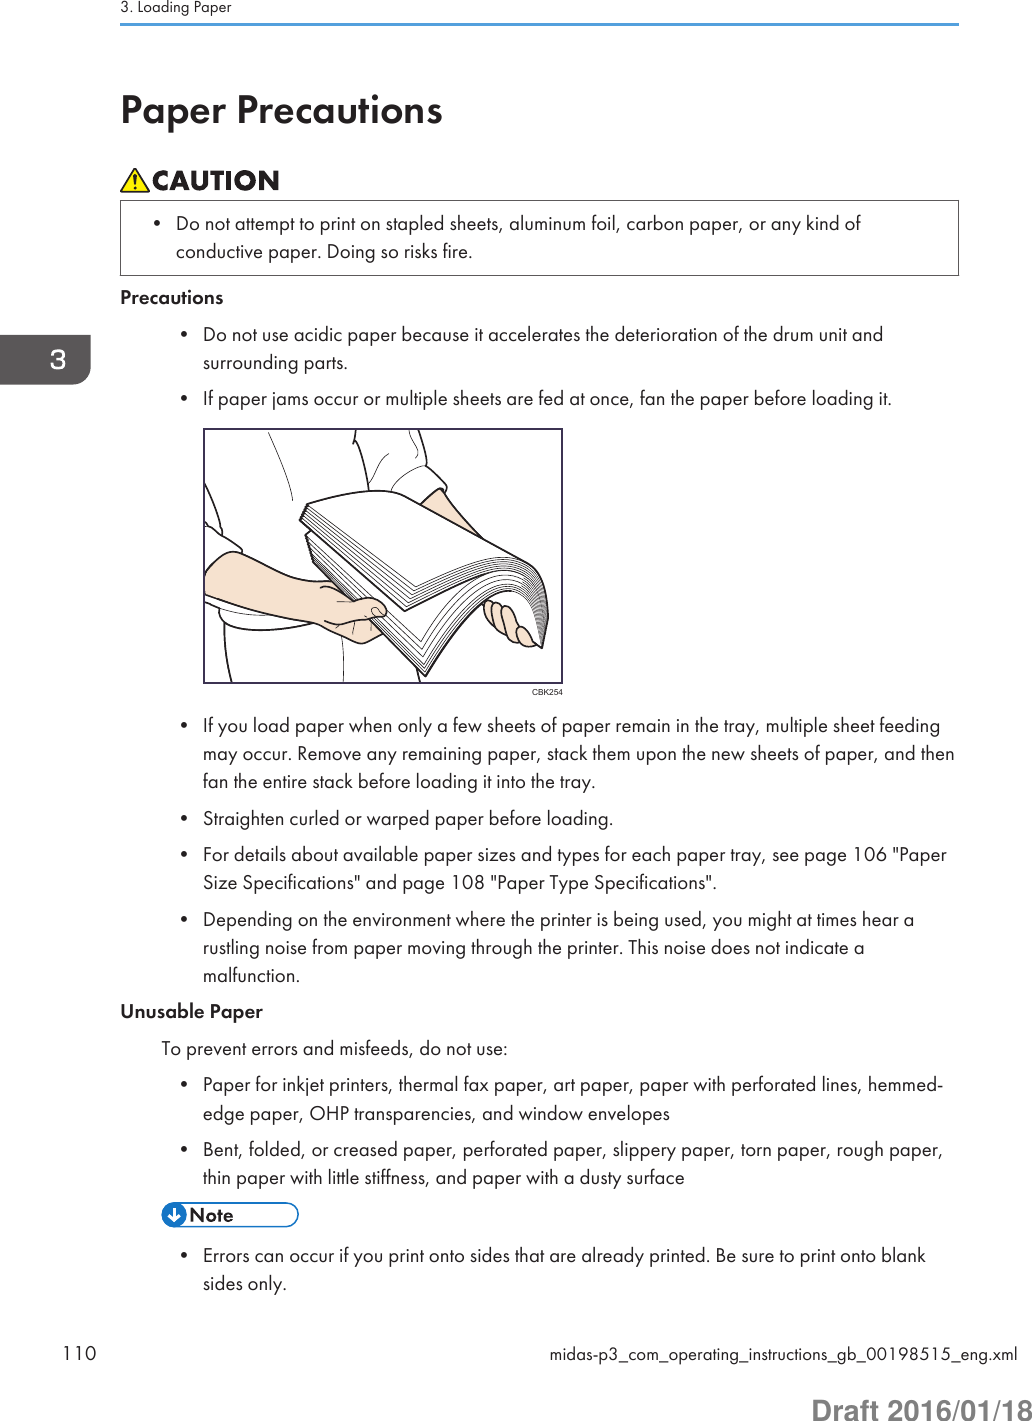 Paper Precautions• Do not attempt to print on stapled sheets, aluminum foil, carbon paper, or any kind ofconductive paper. Doing so risks fire.Precautions• Do not use acidic paper because it accelerates the deterioration of the drum unit andsurrounding parts.• If paper jams occur or multiple sheets are fed at once, fan the paper before loading it.CBK254• If you load paper when only a few sheets of paper remain in the tray, multiple sheet feedingmay occur. Remove any remaining paper, stack them upon the new sheets of paper, and thenfan the entire stack before loading it into the tray.• Straighten curled or warped paper before loading.• For details about available paper sizes and types for each paper tray, see page 106 &quot;PaperSize Specifications&quot; and page 108 &quot;Paper Type Specifications&quot;.• Depending on the environment where the printer is being used, you might at times hear arustling noise from paper moving through the printer. This noise does not indicate amalfunction.Unusable PaperTo prevent errors and misfeeds, do not use:• Paper for inkjet printers, thermal fax paper, art paper, paper with perforated lines, hemmed-edge paper, OHP transparencies, and window envelopes• Bent, folded, or creased paper, perforated paper, slippery paper, torn paper, rough paper,thin paper with little stiffness, and paper with a dusty surface• Errors can occur if you print onto sides that are already printed. Be sure to print onto blanksides only.3. Loading Paper110 midas-p3_com_operating_instructions_gb_00198515_eng.xmlDraft 2016/01/18